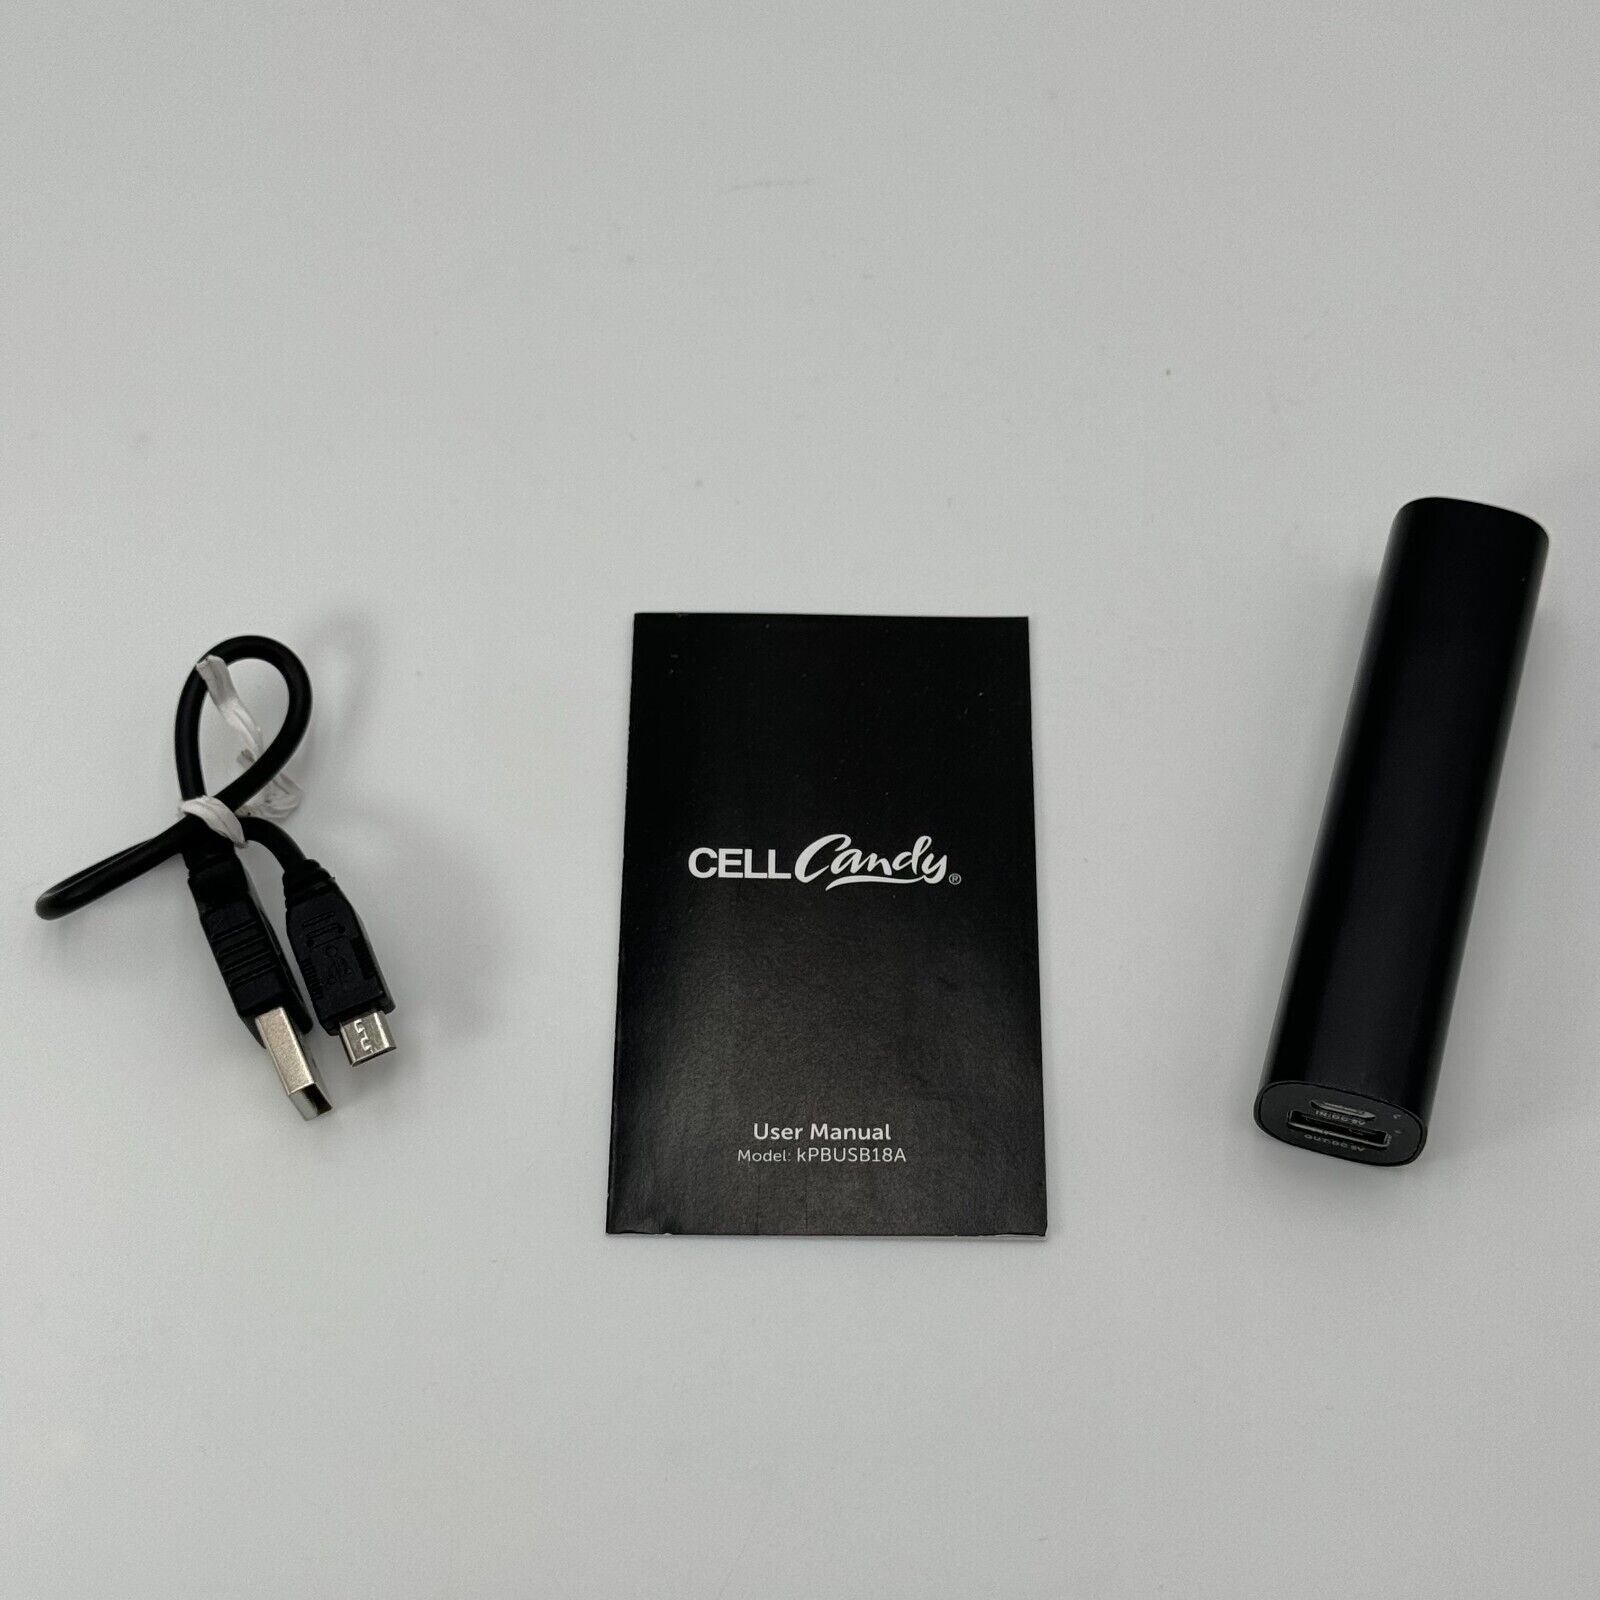 Cell Candy Portable Power Pack 1800 mAh Phone Charger Micro USB Black - New